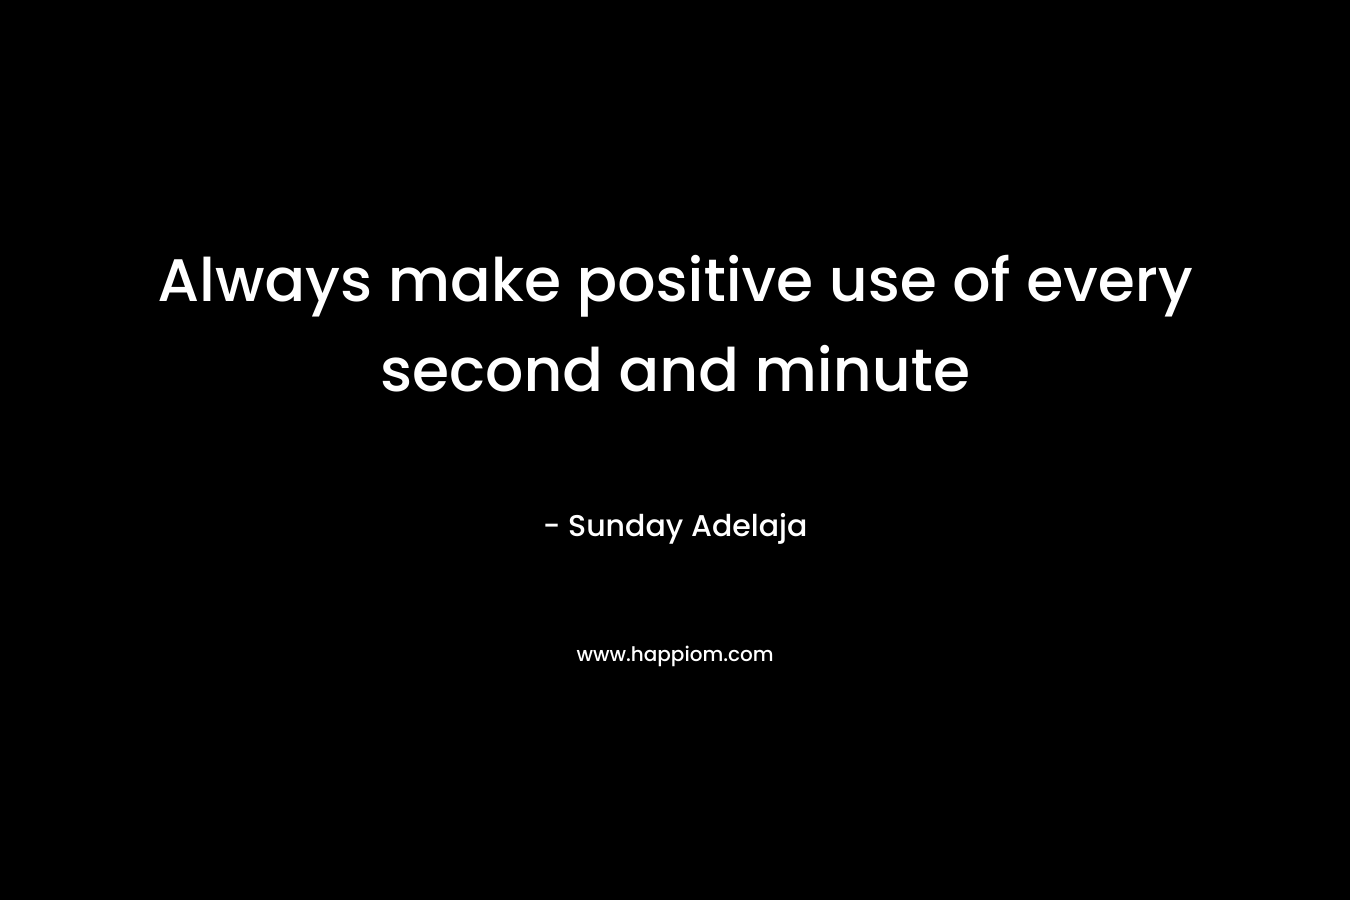 Always make positive use of every second and minute